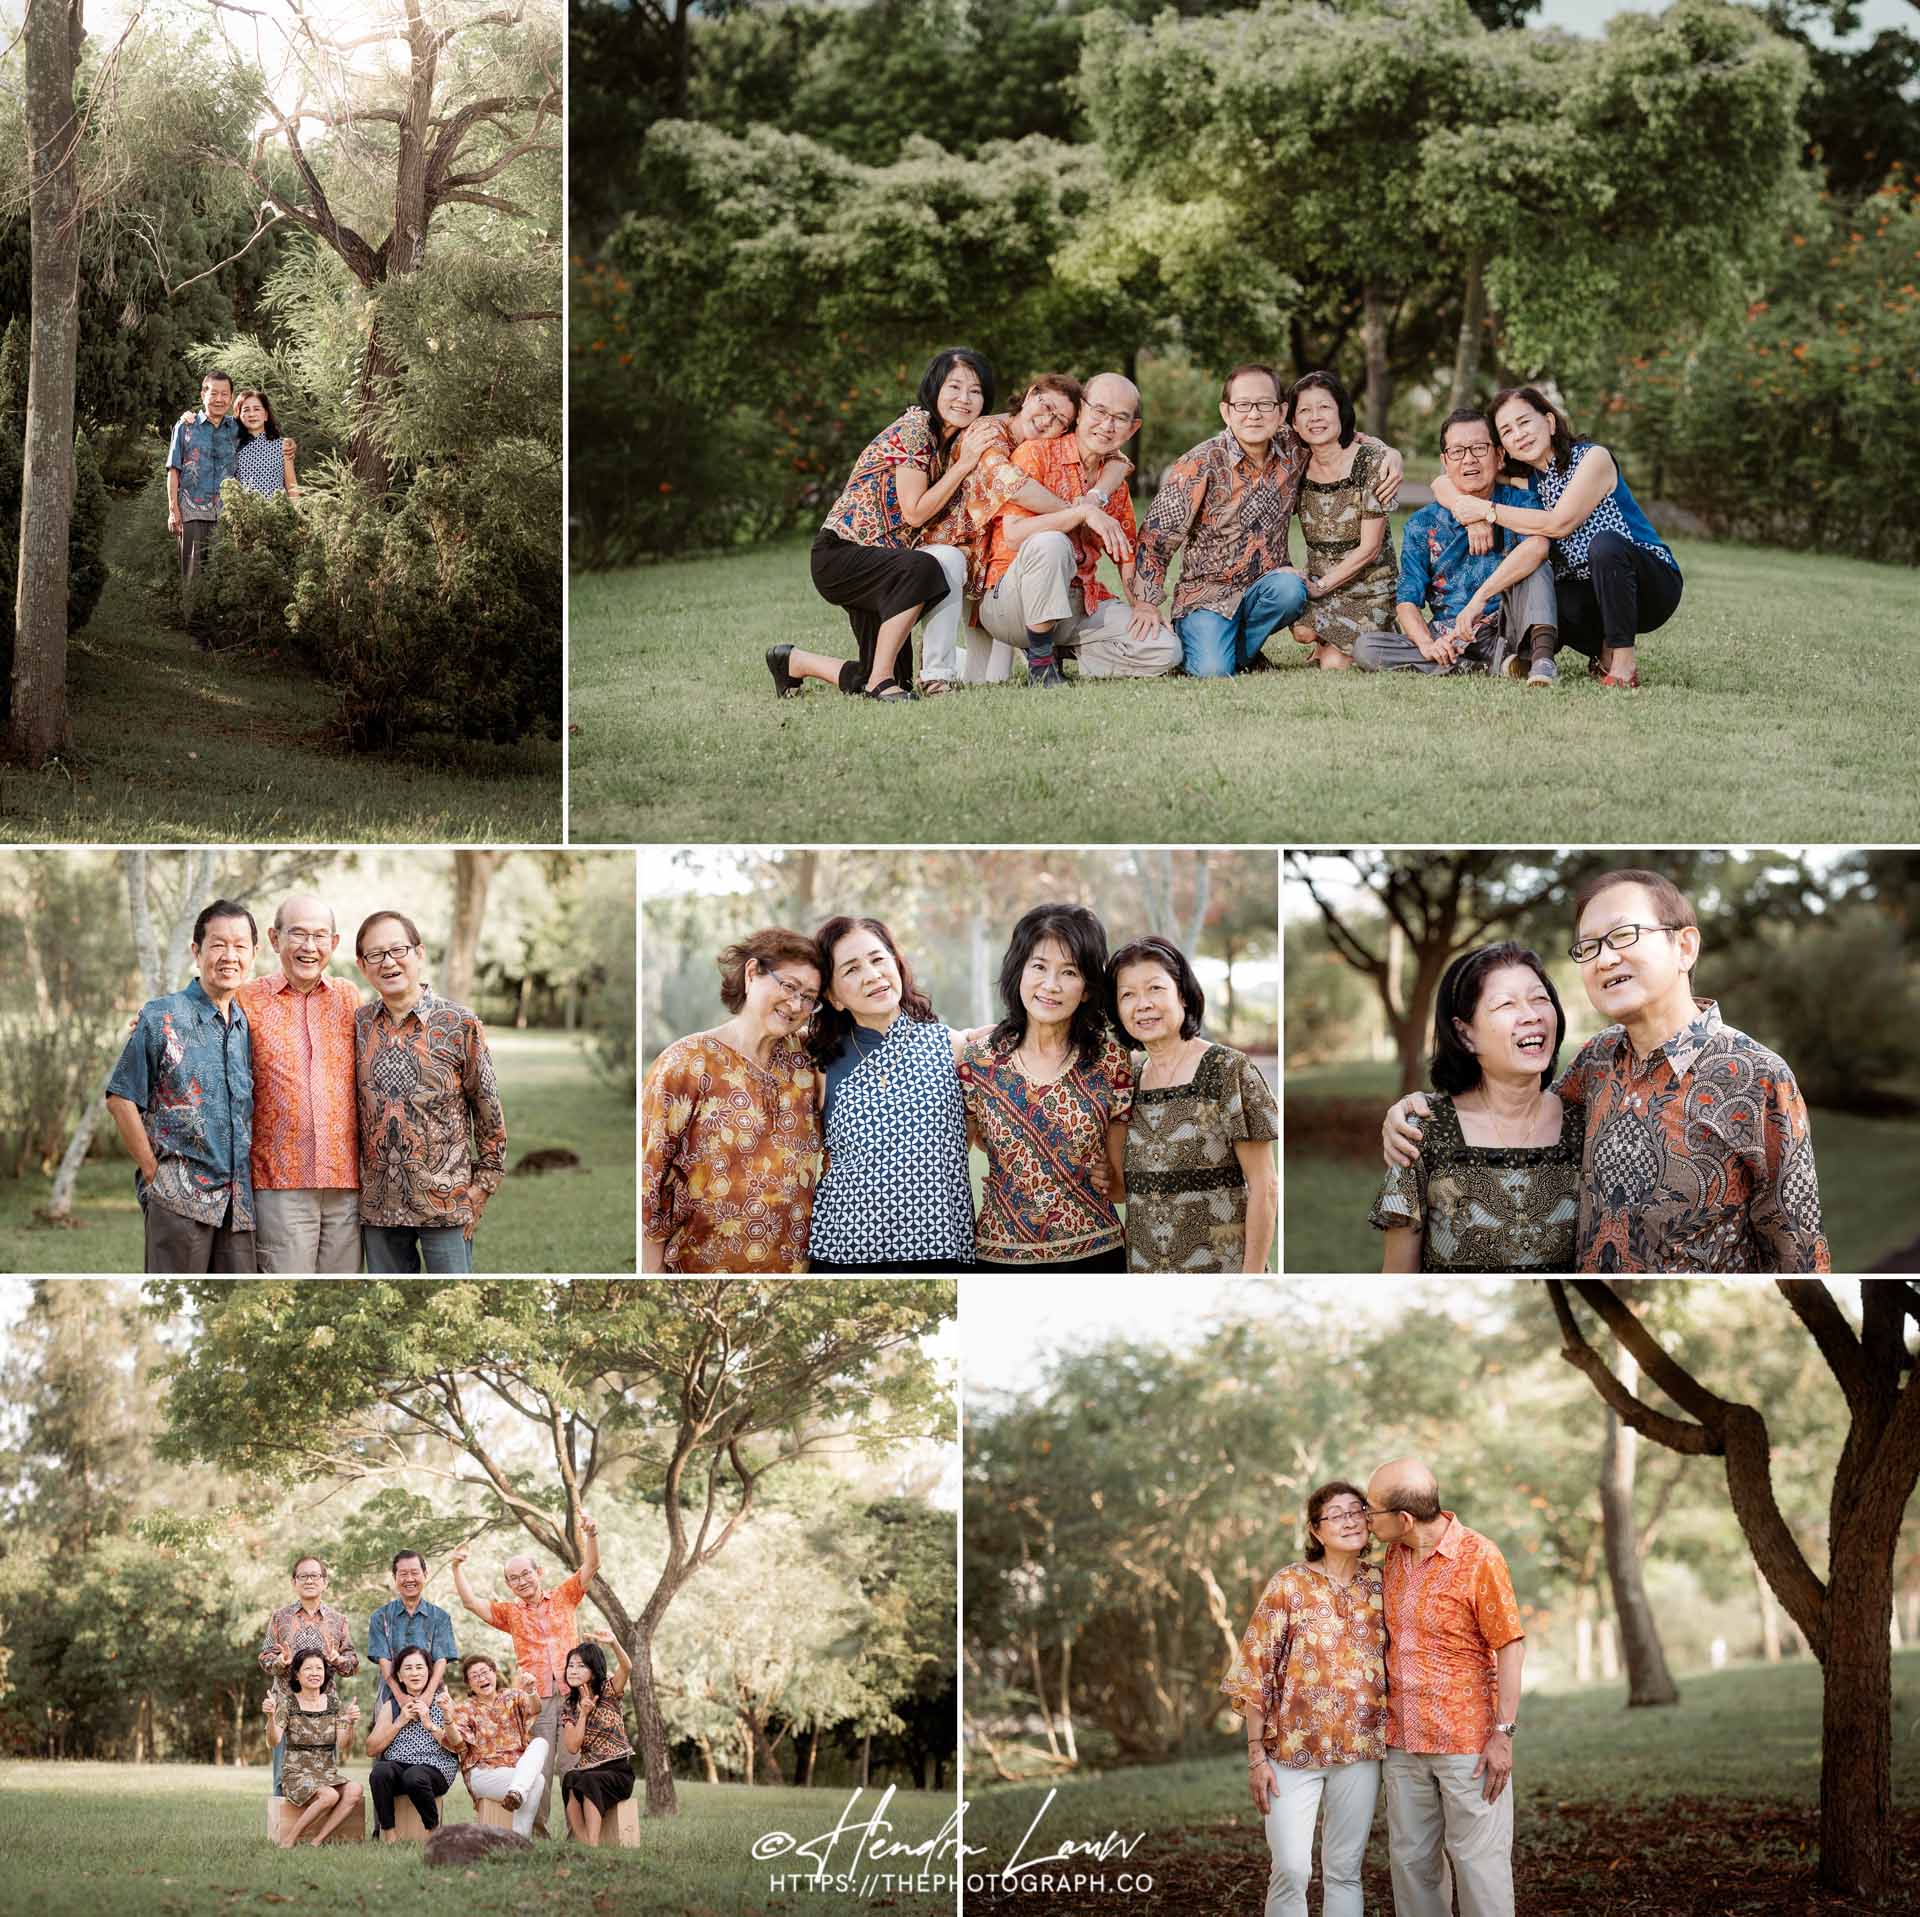 Siblings and extended family photoshoot